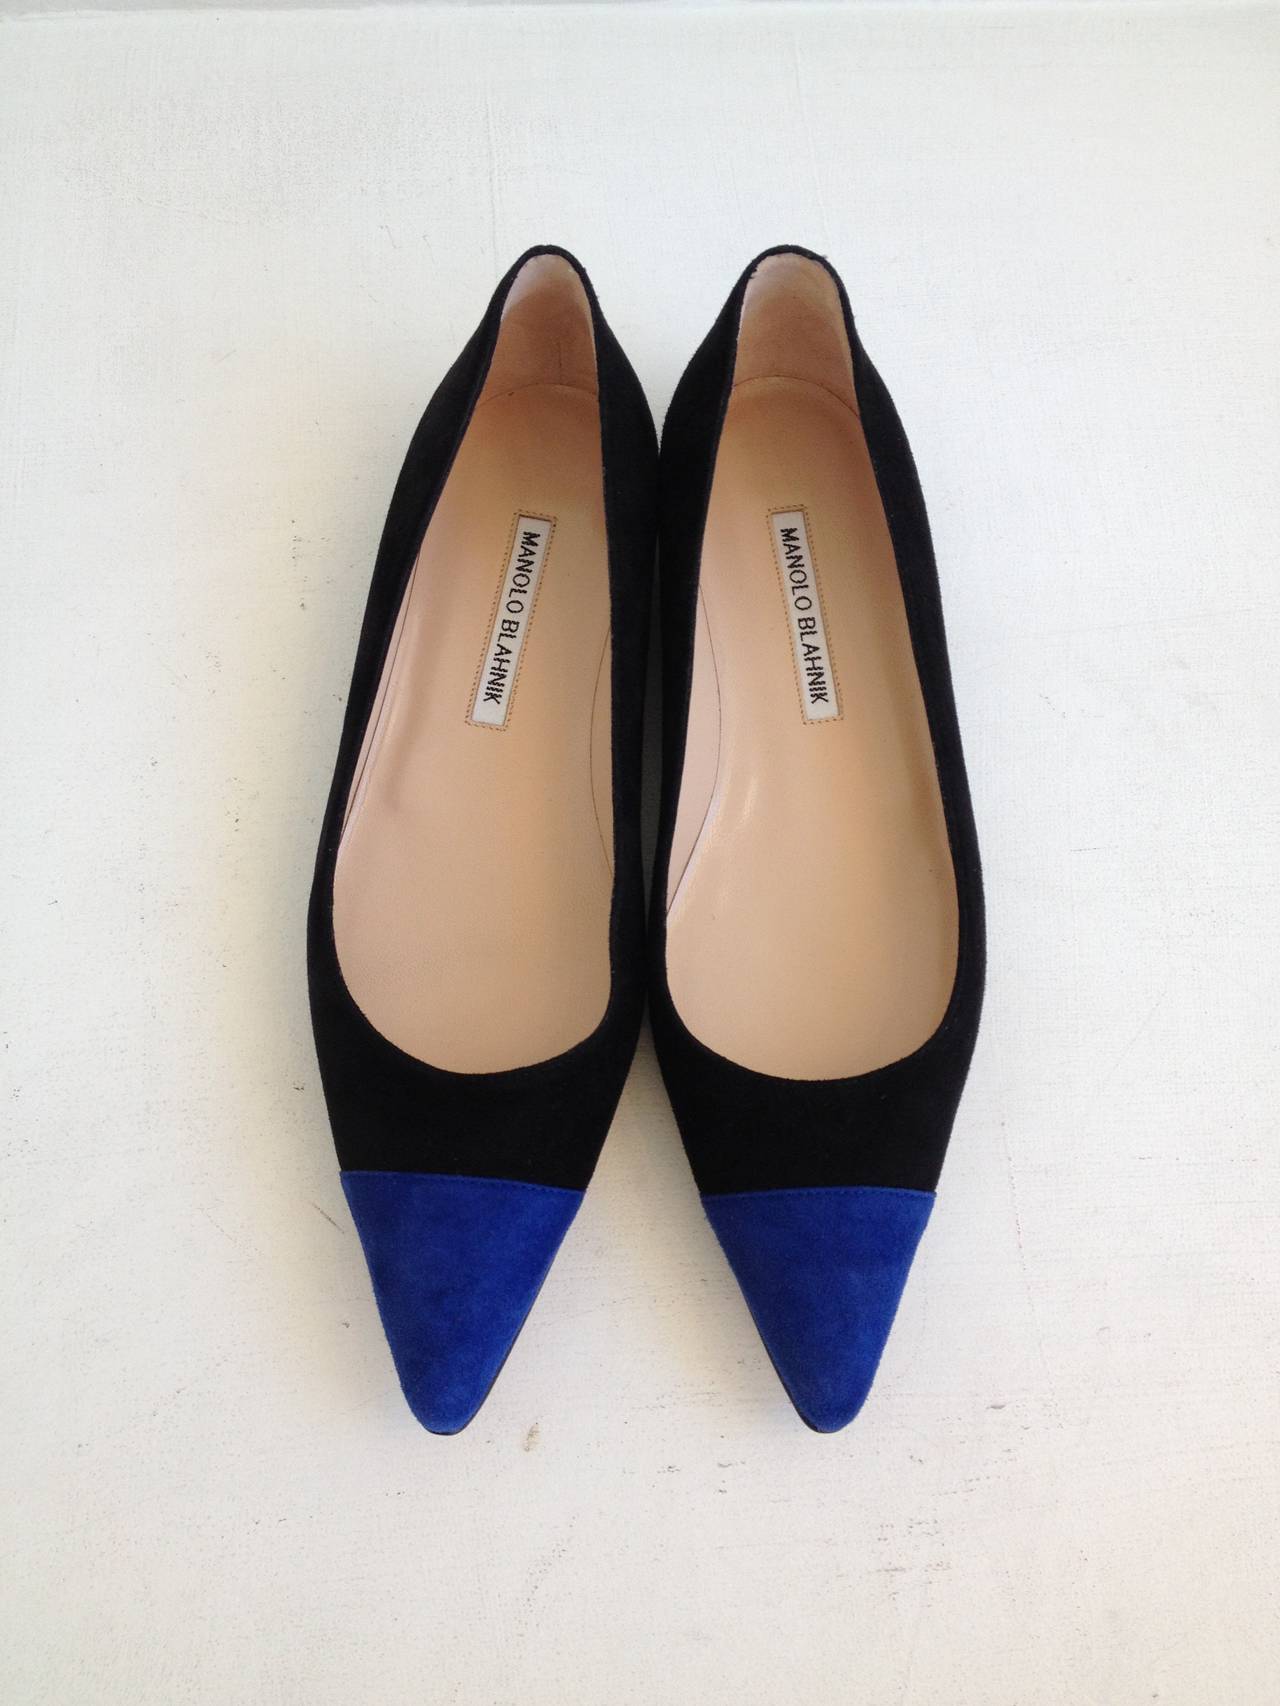 Bold, graphic, modernist - these Manolo Blahnik flats make such an impact! Velvety black suede is accented with a deep cobalt blue cap toe, adding a cool punch to the sleekly pointed skimmer style. Wear with black cropped skinny trousers and a boxy